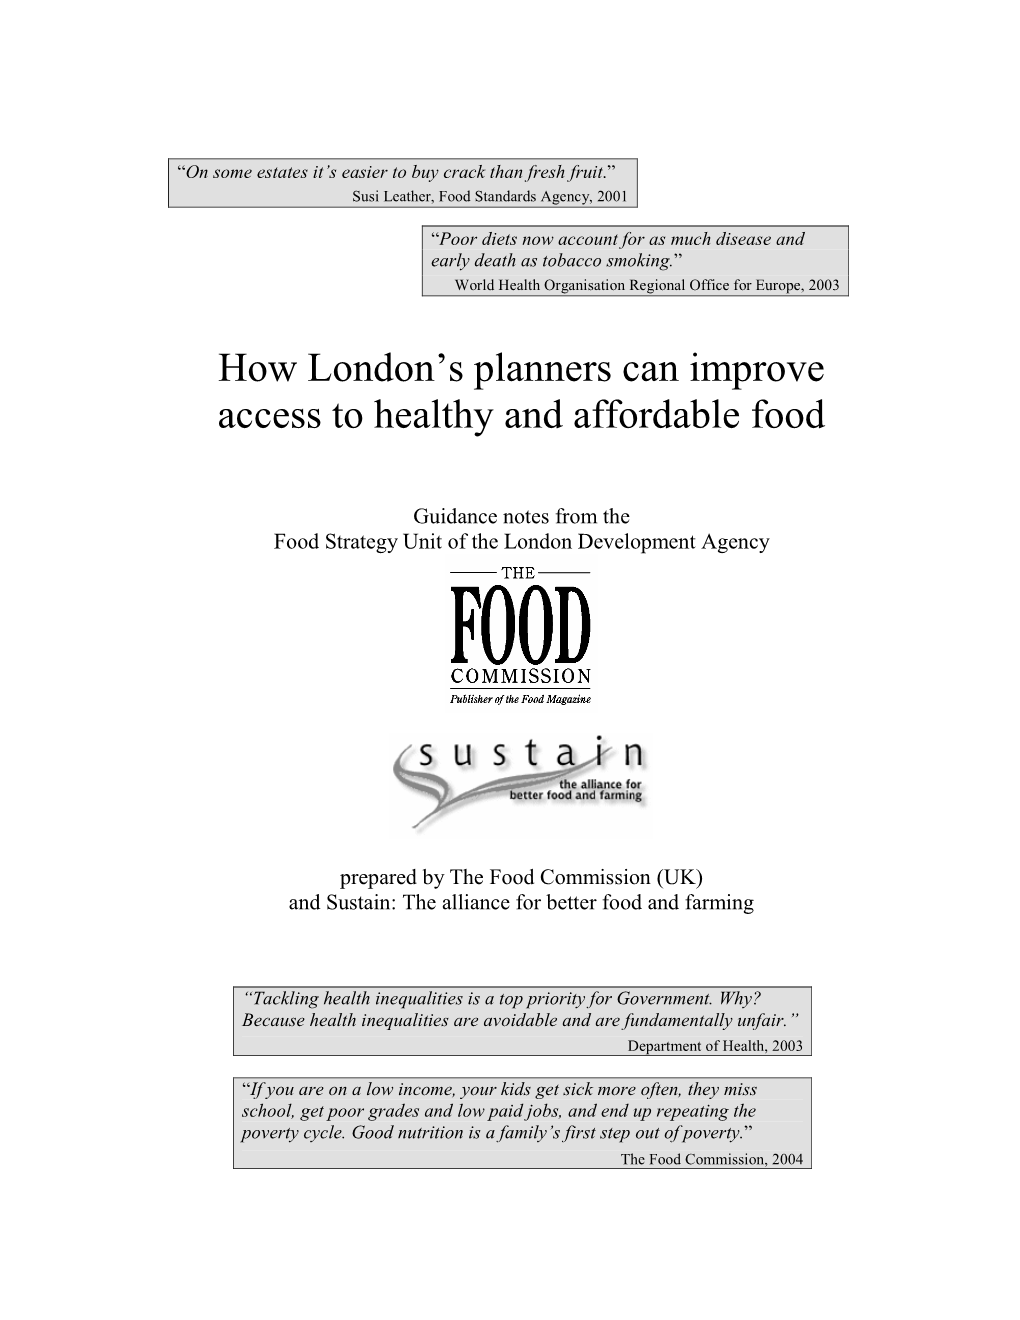 How London's Planners Can Improve Access to Healthy and Affordable Food